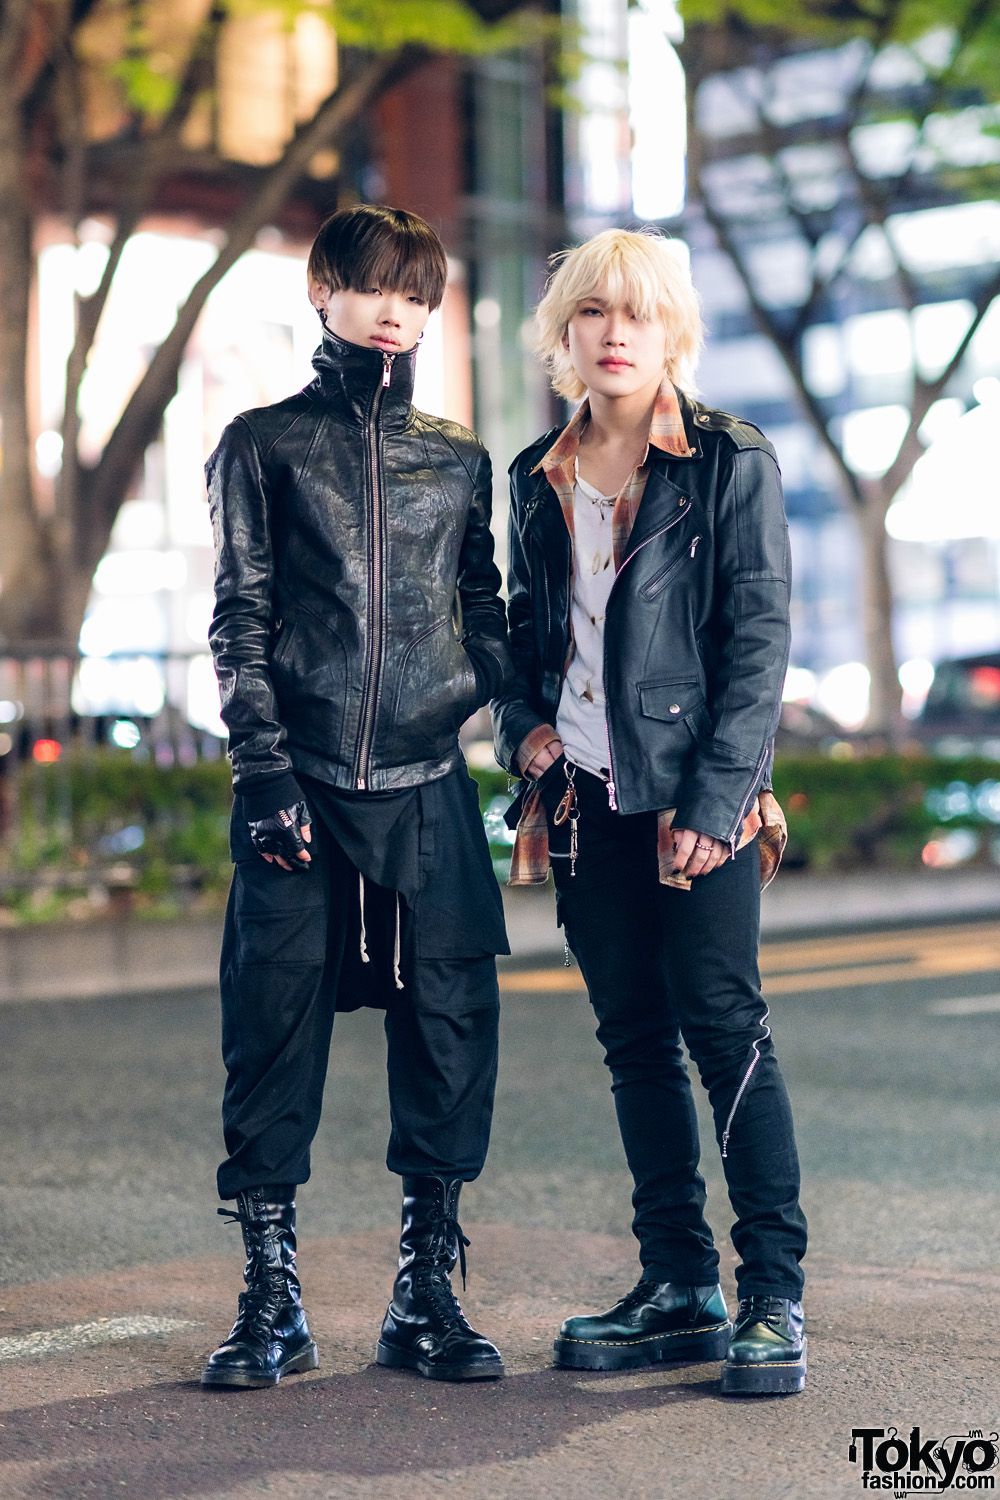 Black Leather Street Styles in Harajuku w/ Rick Owens Leather High Neck Jacket, Vintage Boots, 99%IS-, Motorcycle Jacket, 666 Zipper Jeans & Dr. Martens